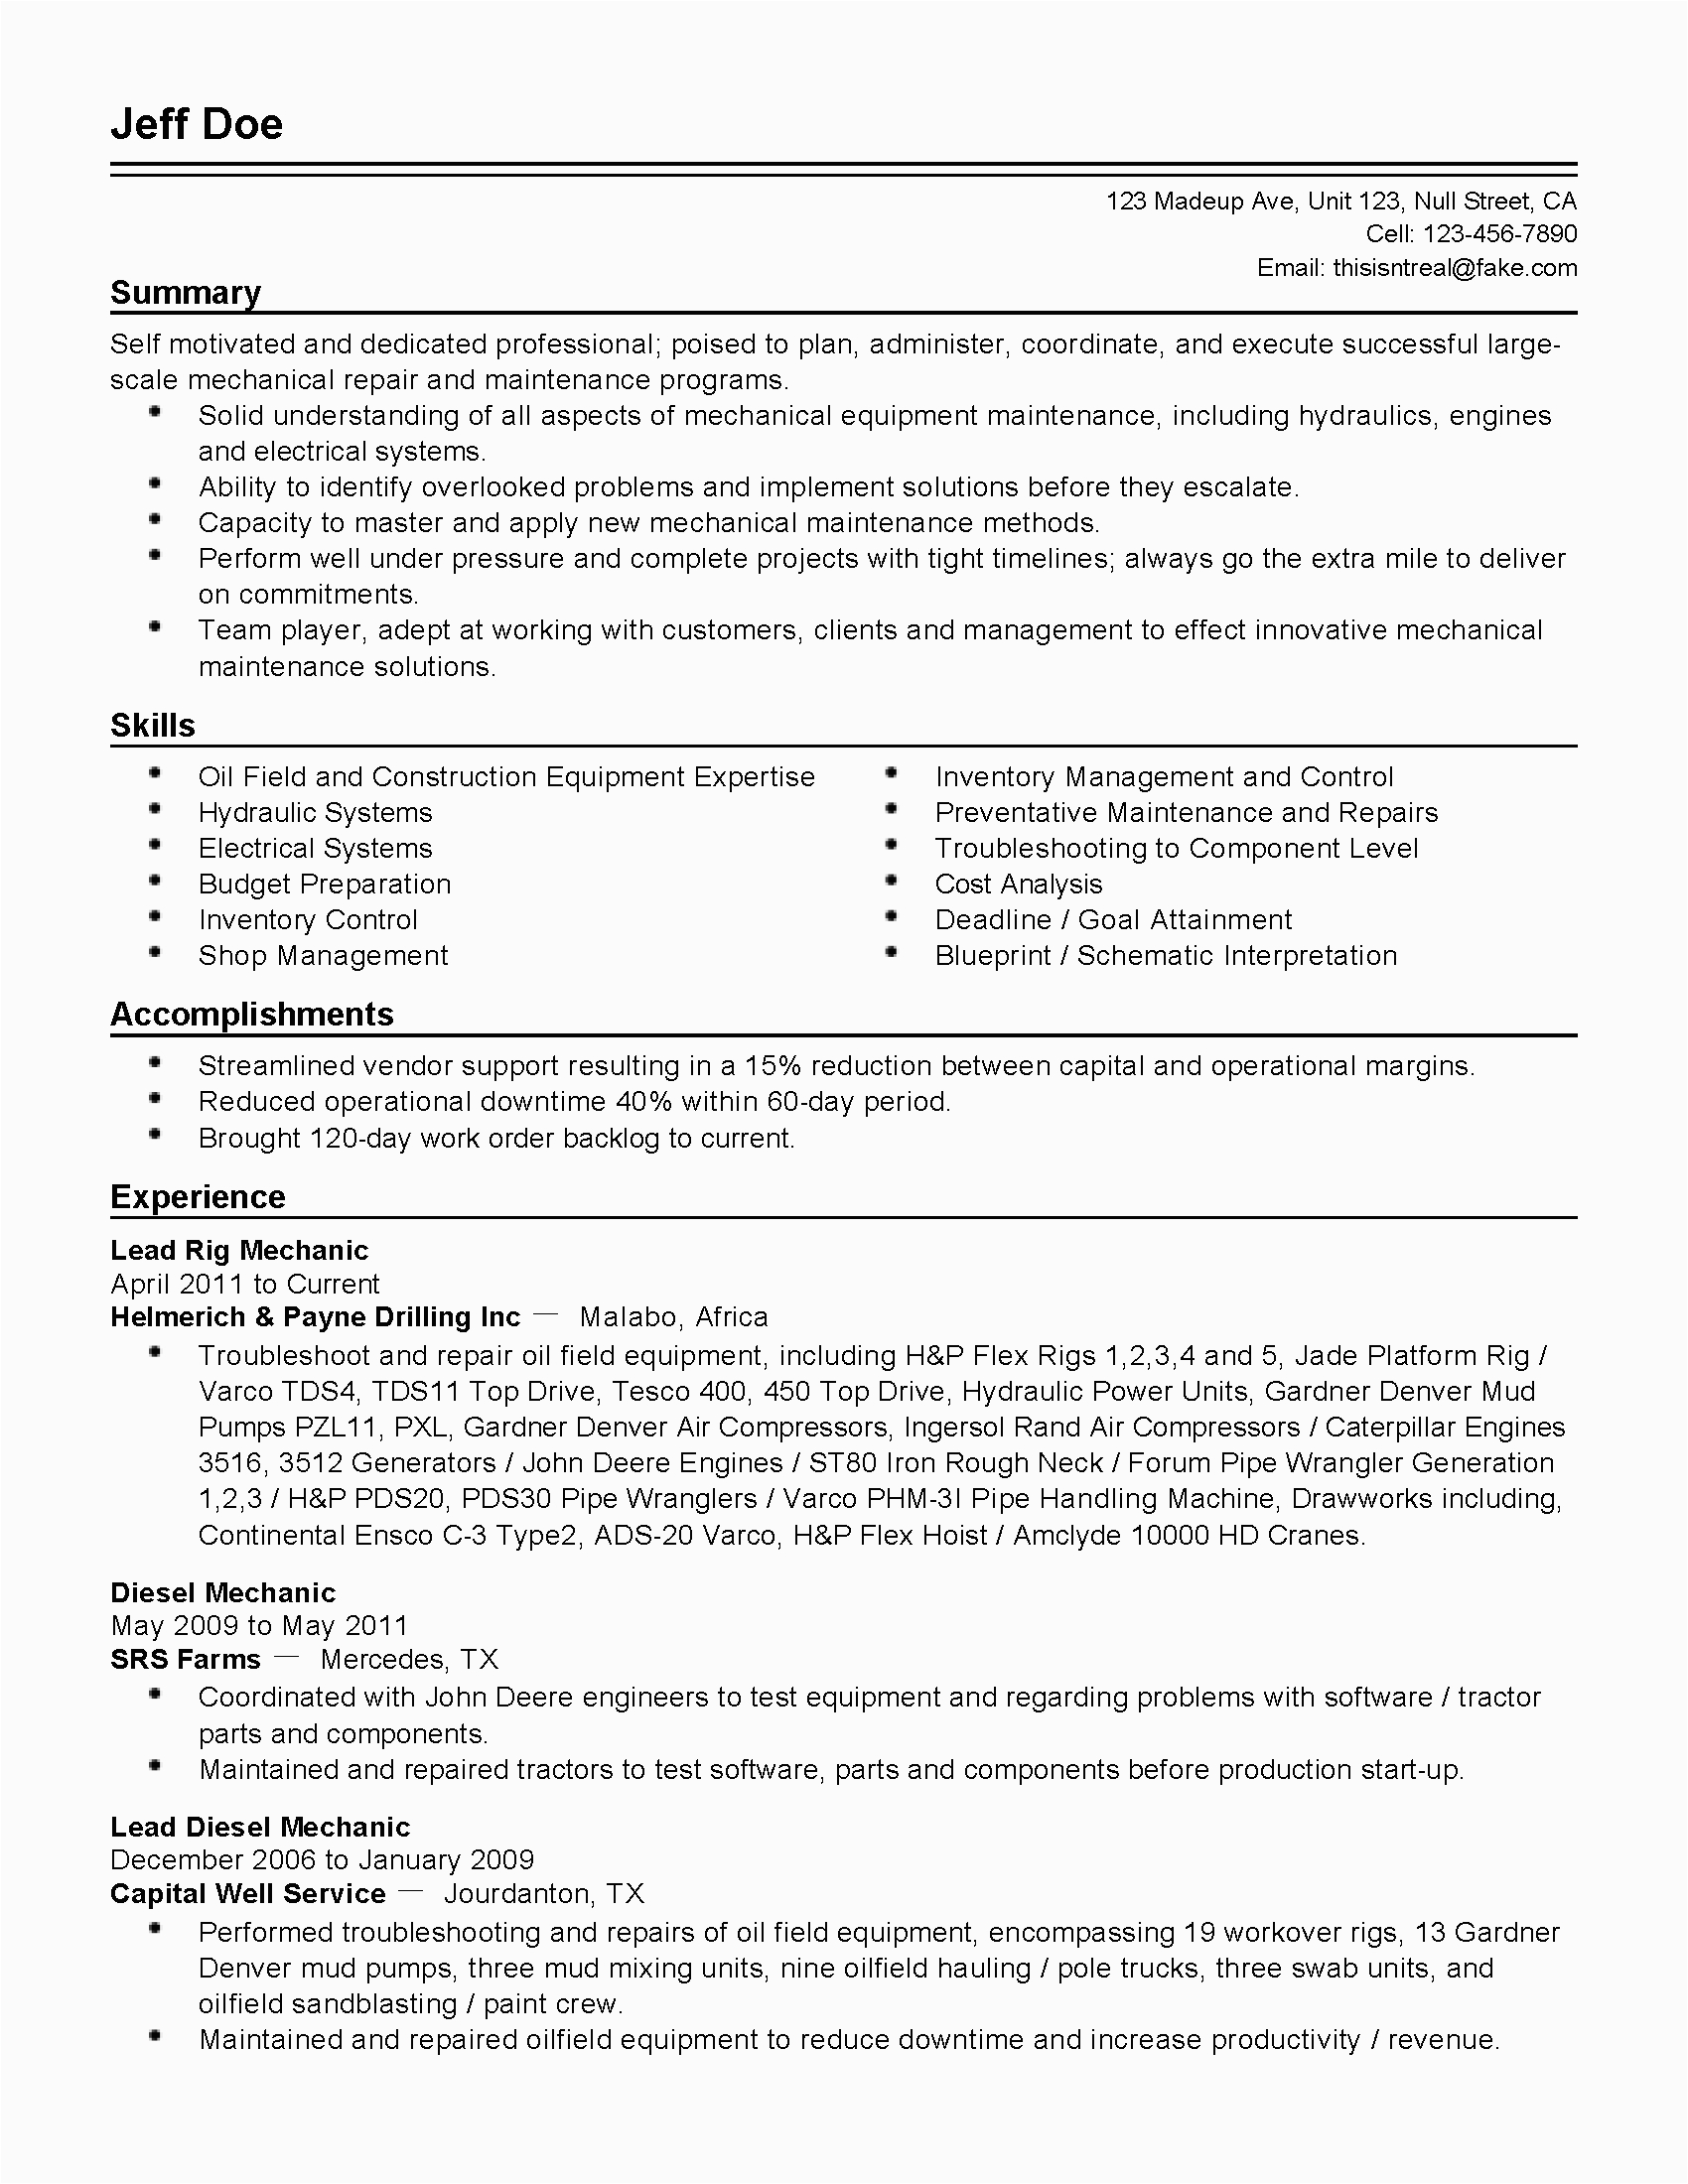 Resume Templates for Oil Field Jobs 8 Oil Field Resume Template Examples